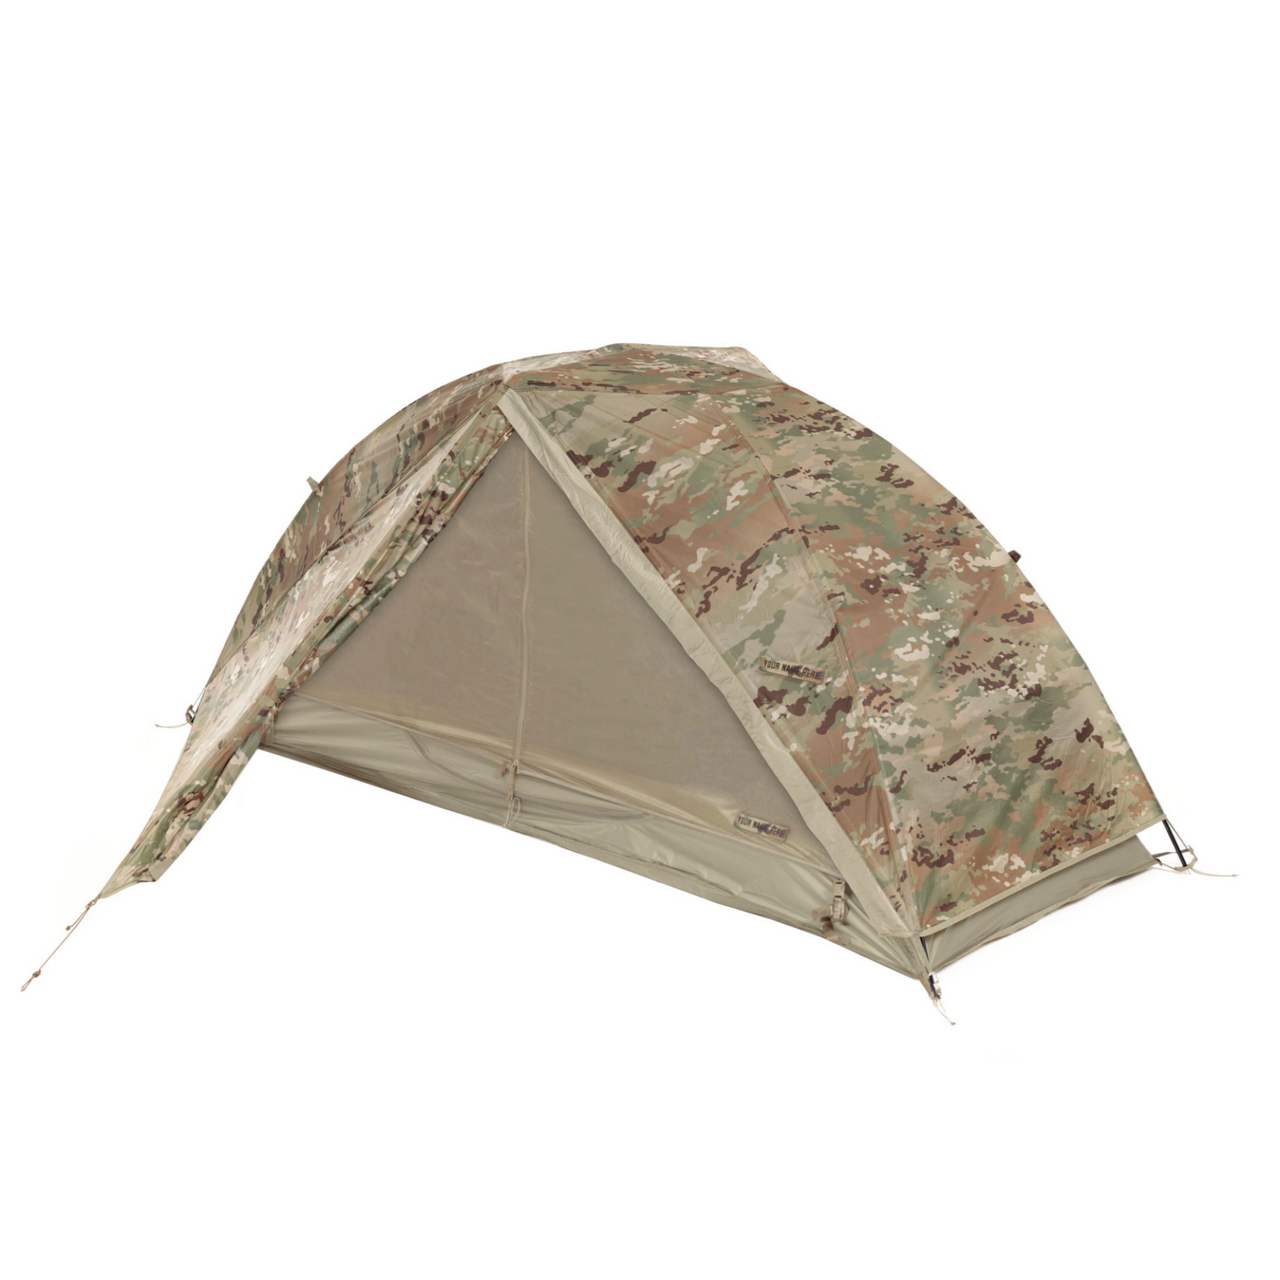 T026 LITEFIGHER 1 INDIVIDUAL SHELTER SYSTEM